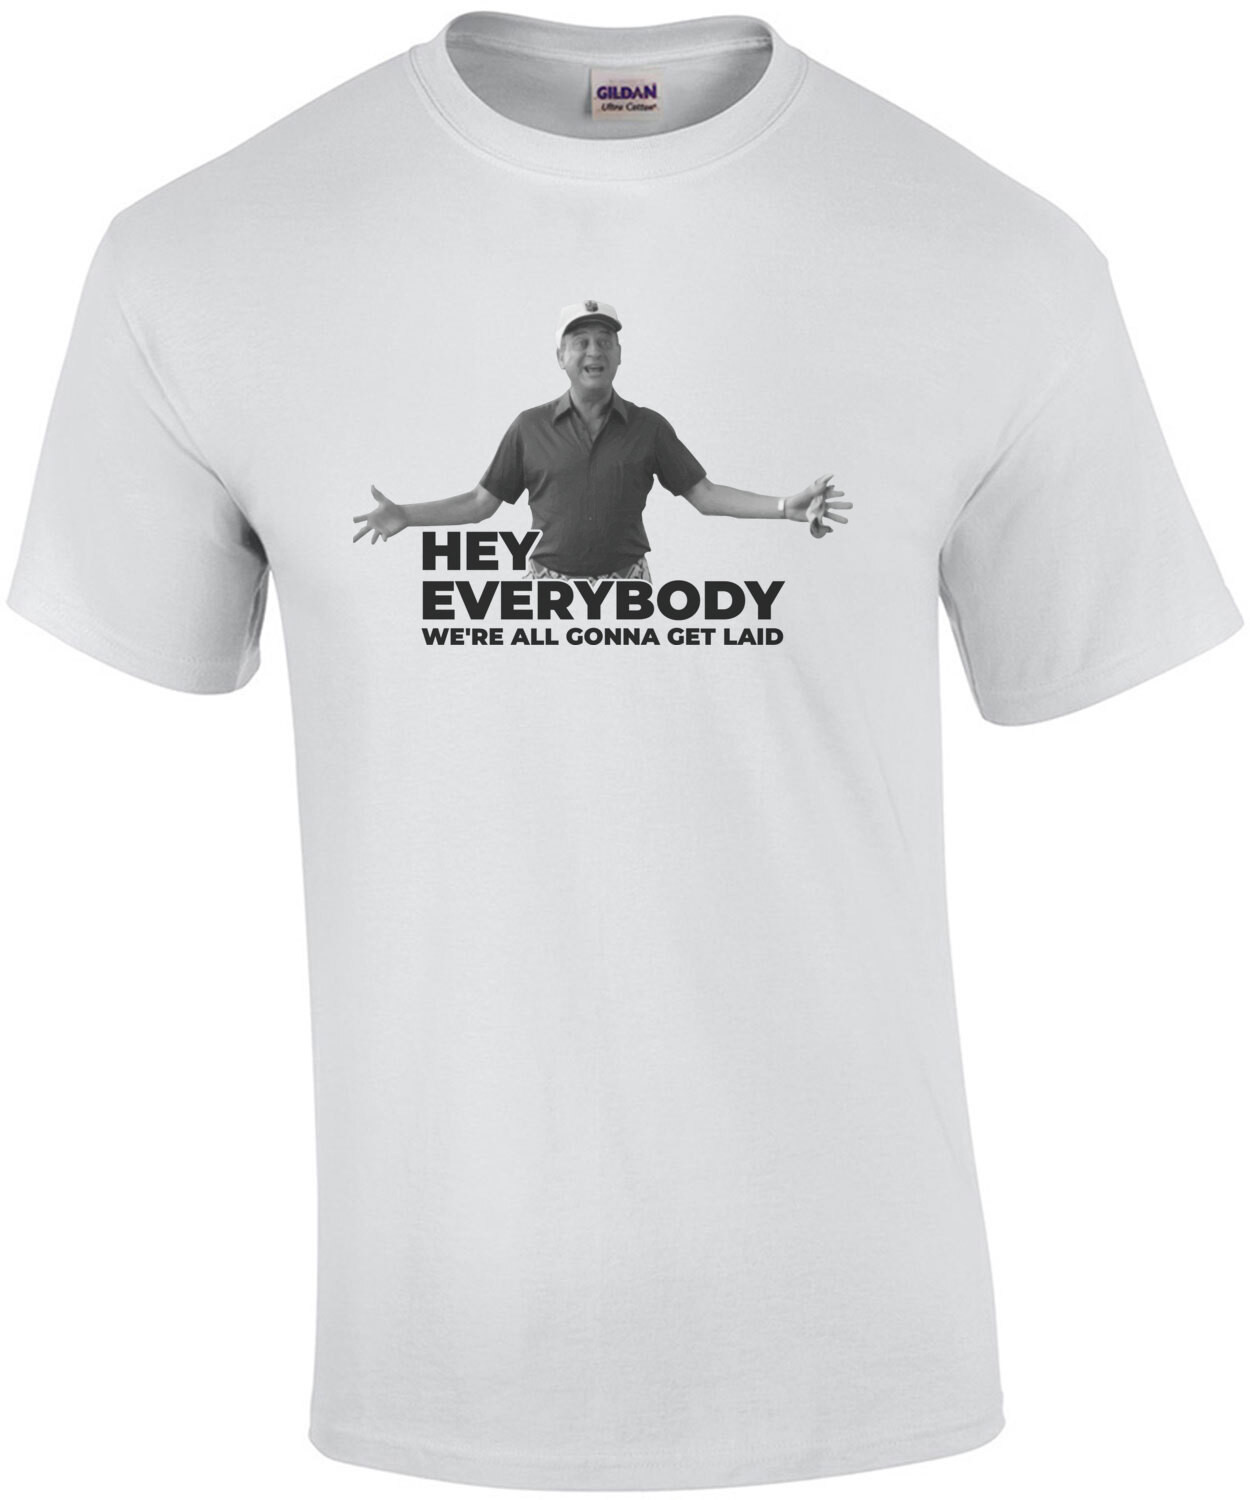 Hey Everyone - We're all gonna get laid - Rodney Dangerfield - Caddyshack - 80's T-Shirt